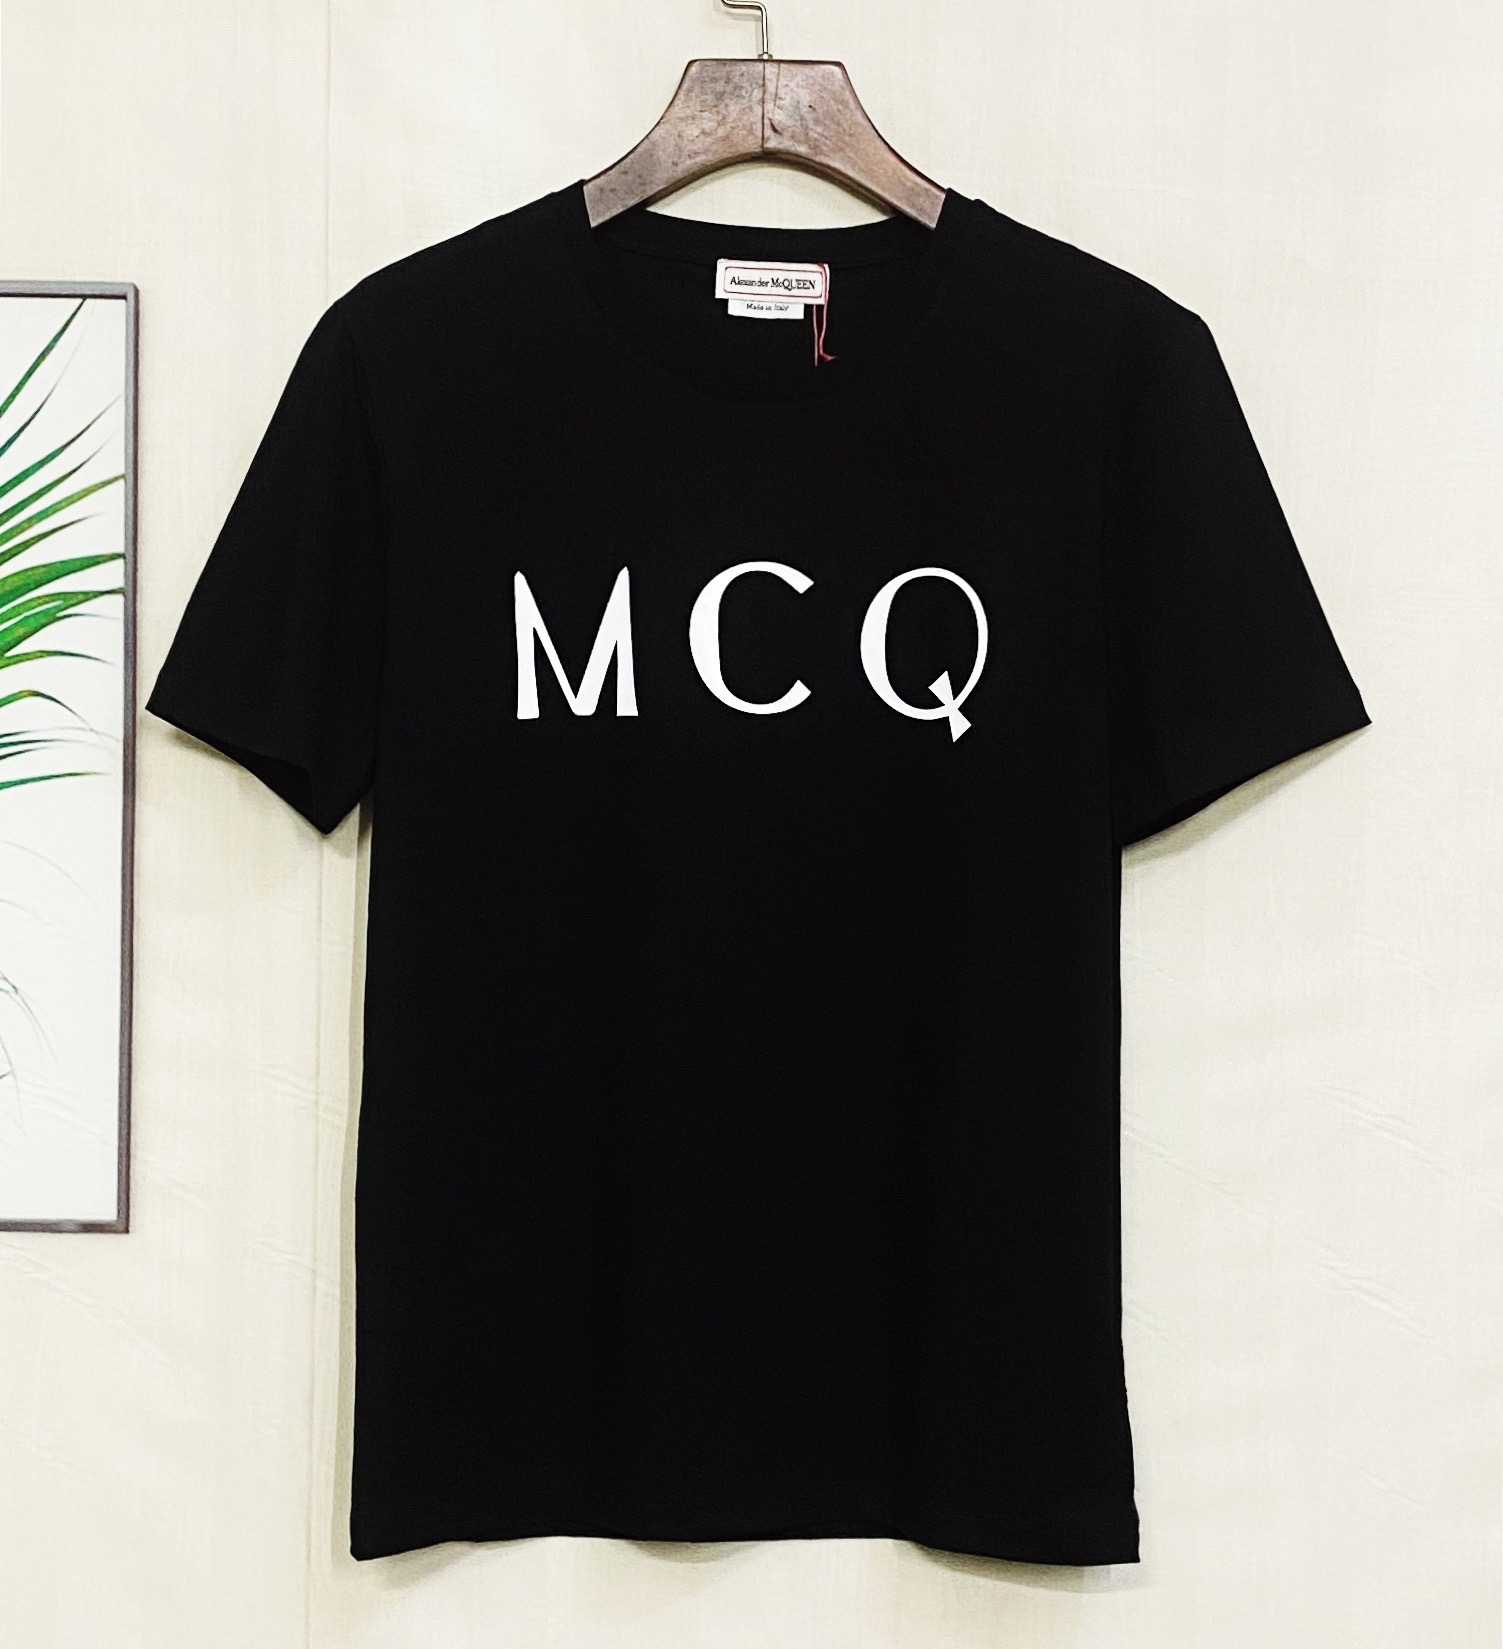 A1exander Mcque 2020 summer men's short-sleeved T-shirt, letter print round neck short sleeve, personality style